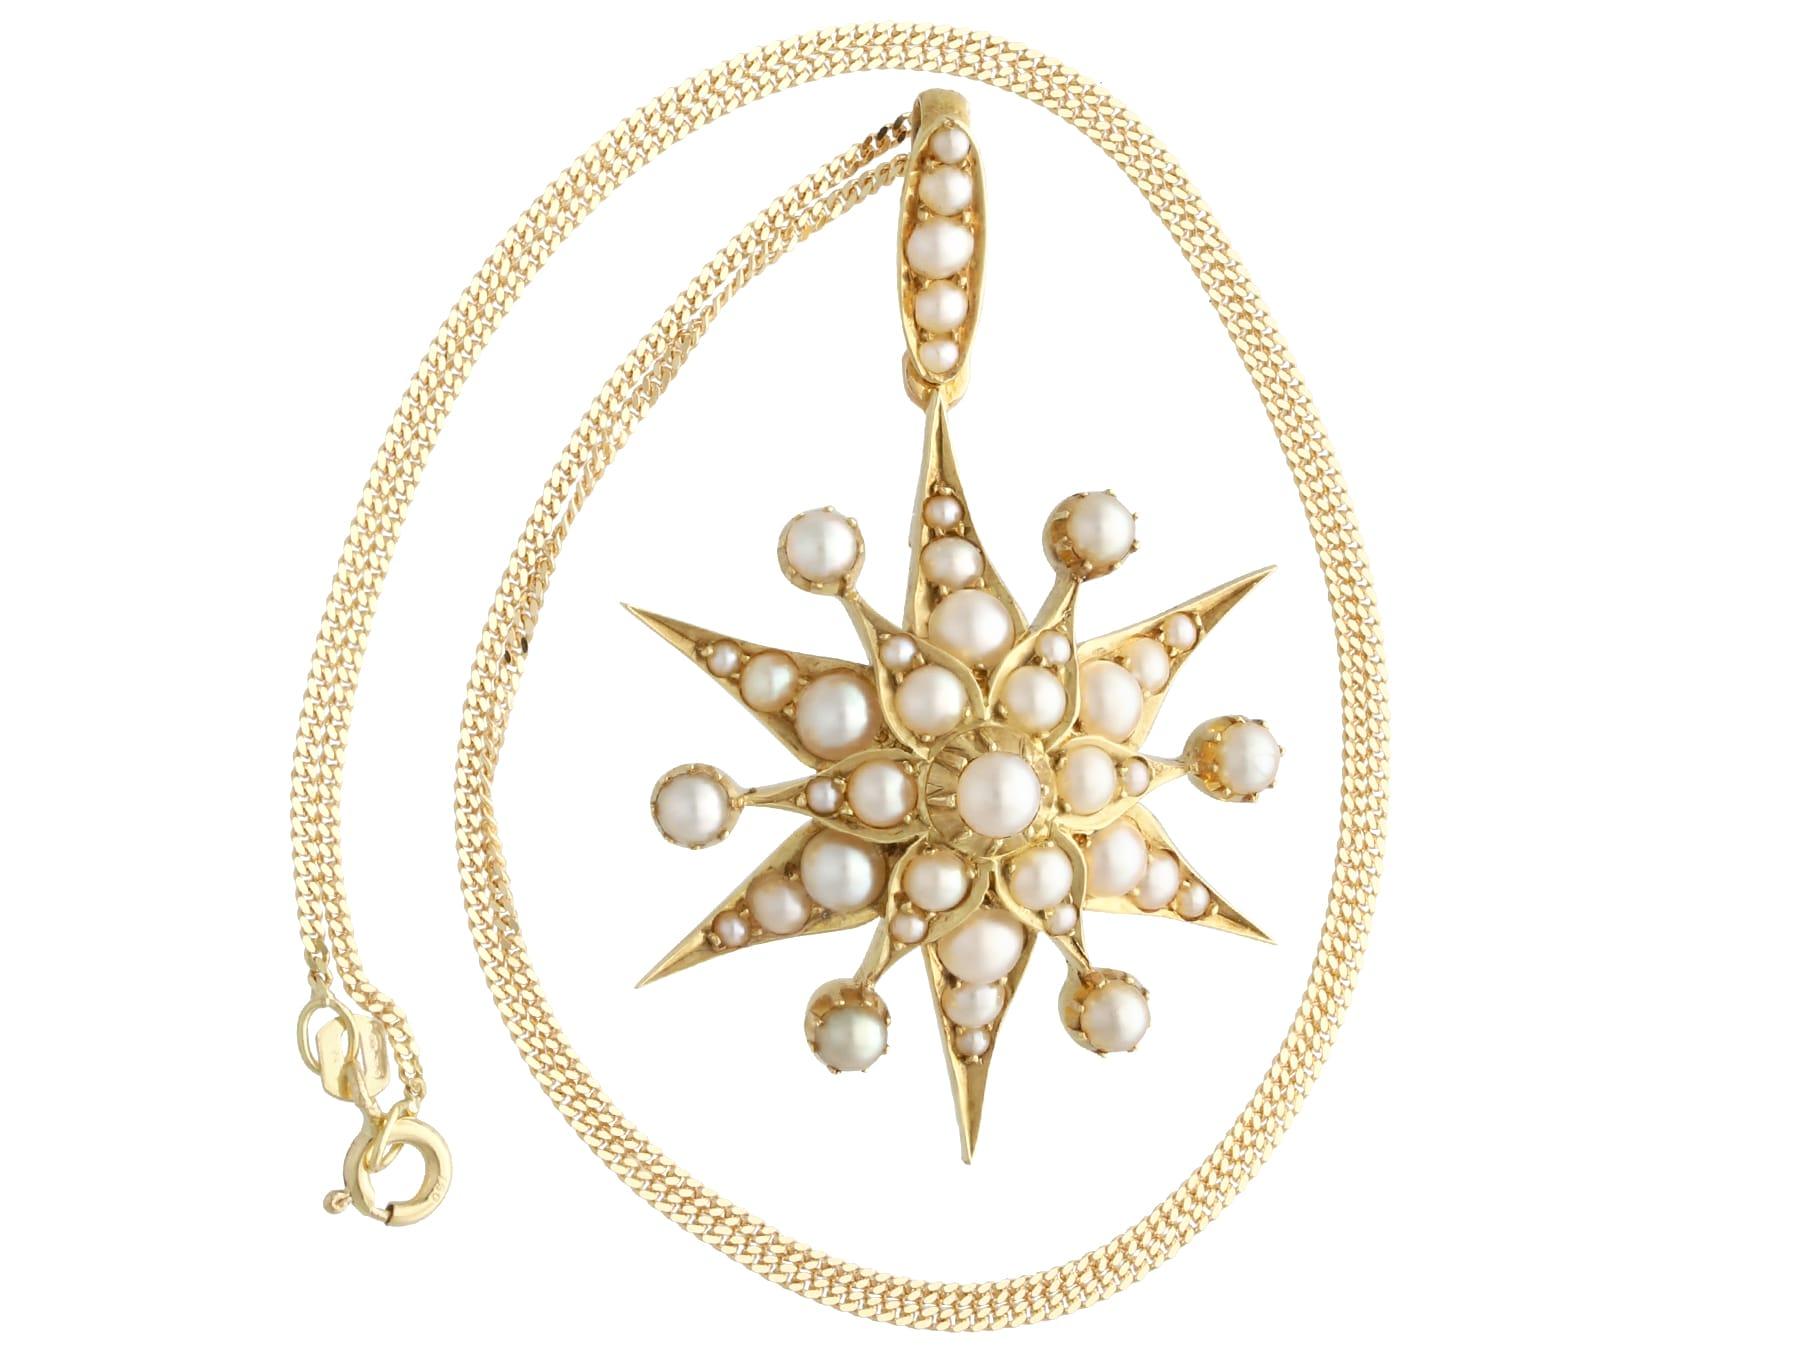 A stunning, fine and impressive antique seed pearl and 15 karat yellow gold pendant / brooch - boxed; part of our versatile antique jewellery collections.

This stunning, fine and impressive antique pearl pendant/brooch has been crafted in 15k